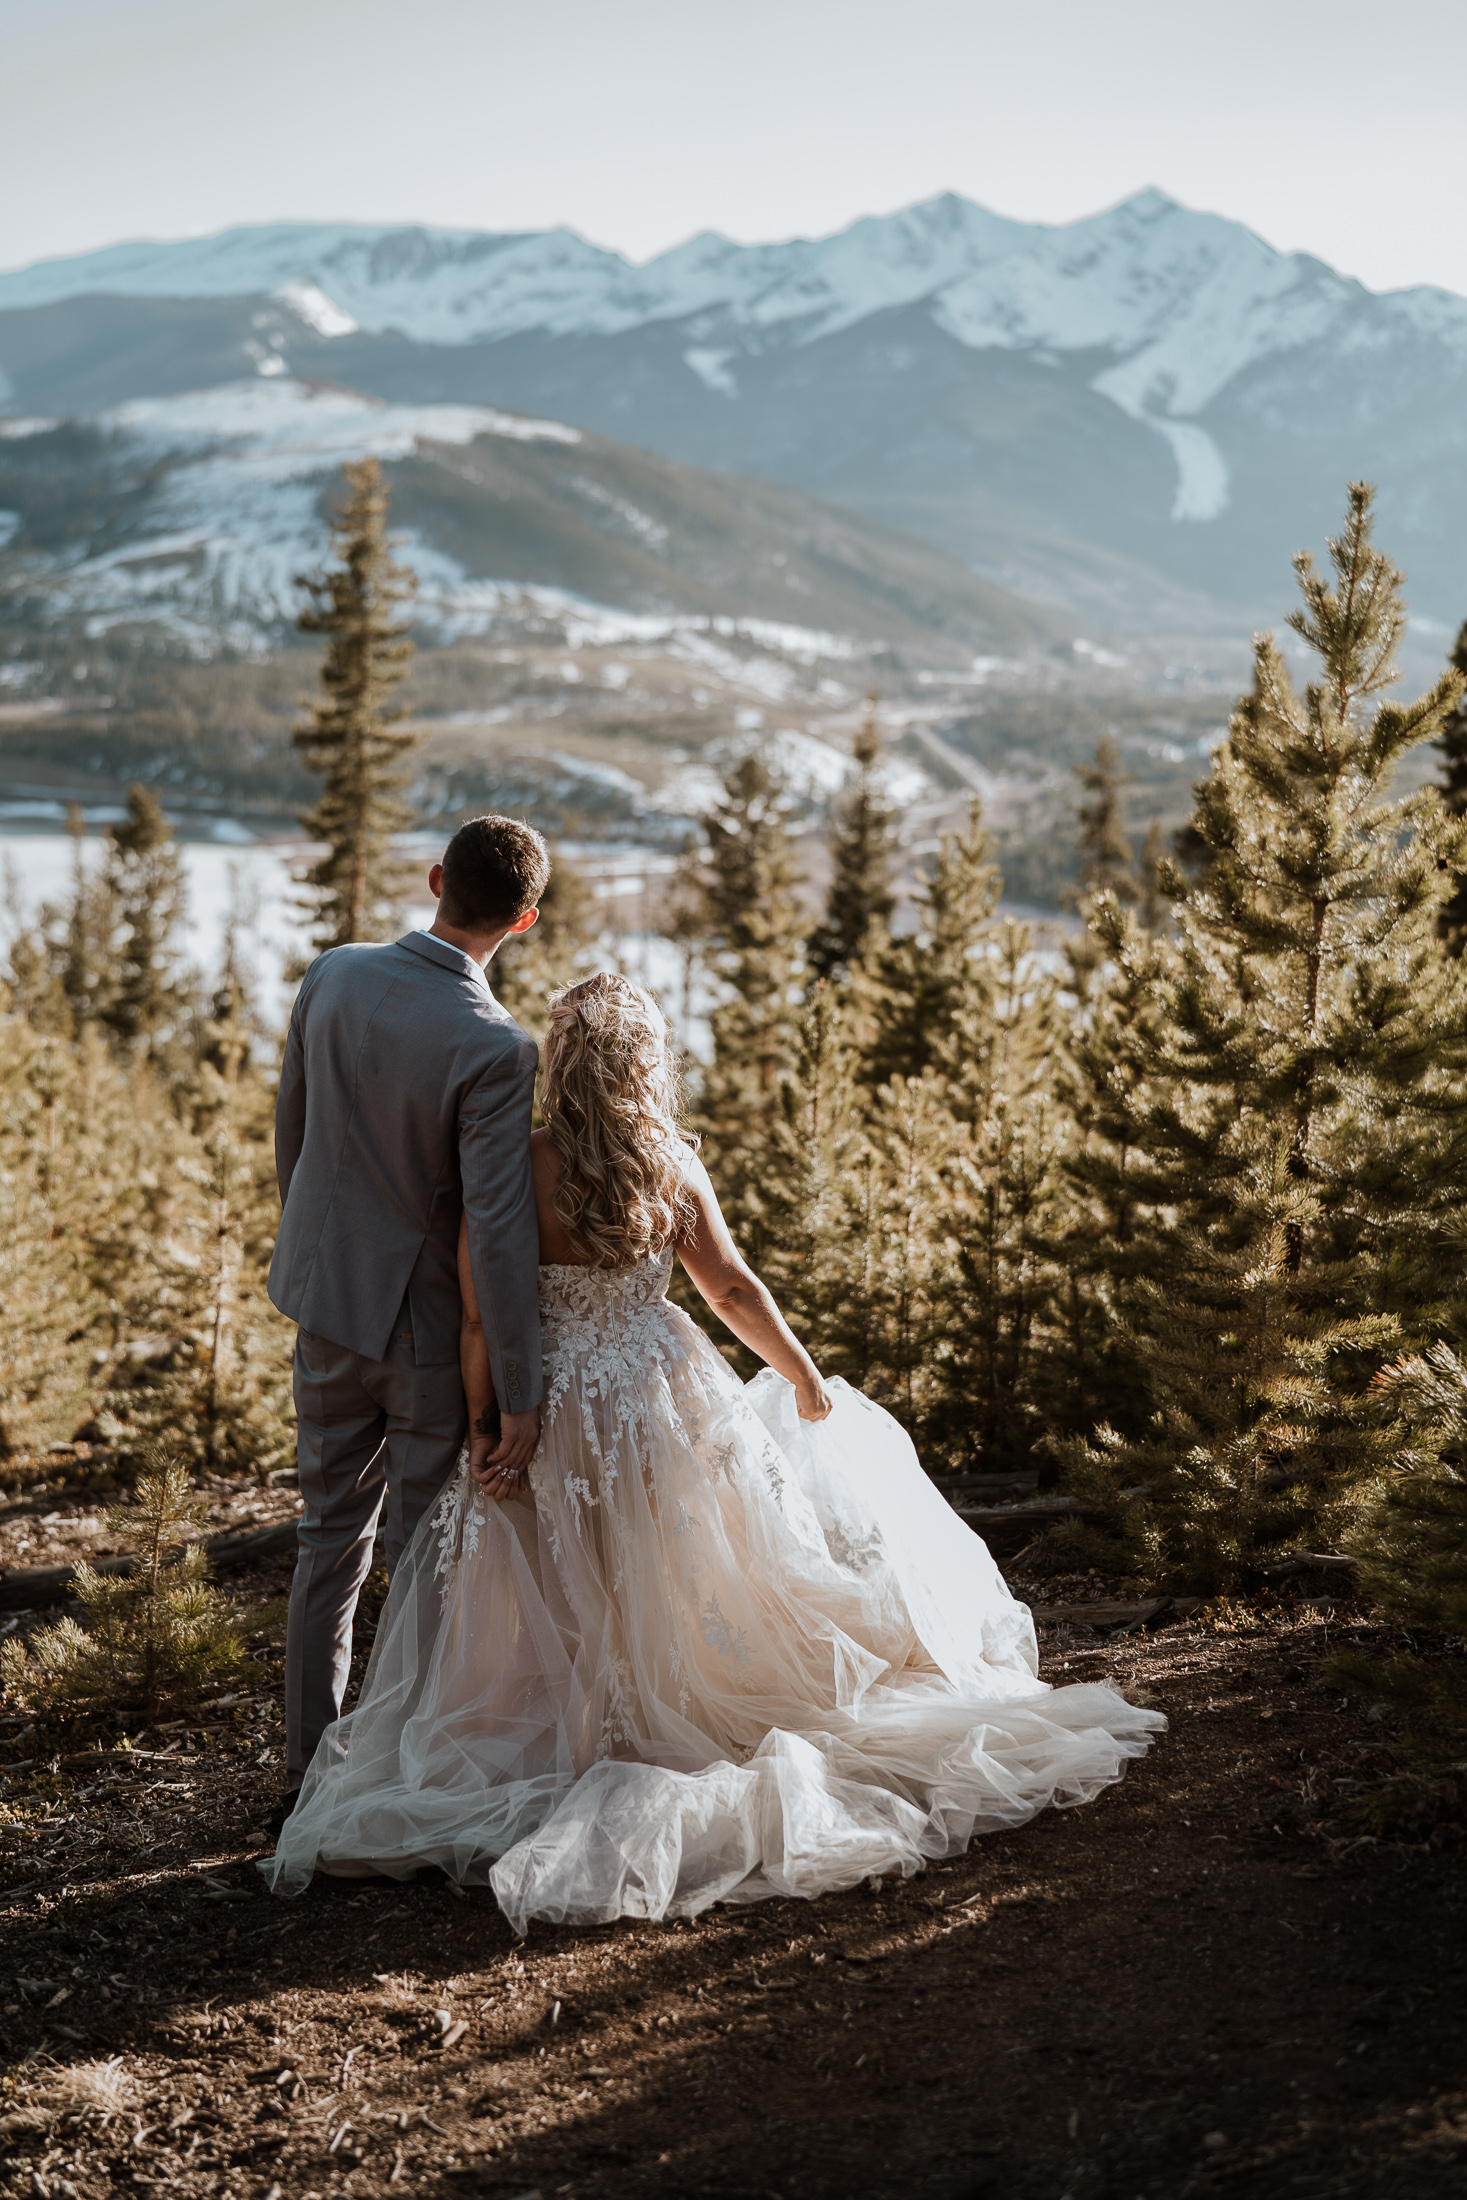 A Colorado elopement at Sapphire Point in Breckenridge, captured by Basecamp Visual.